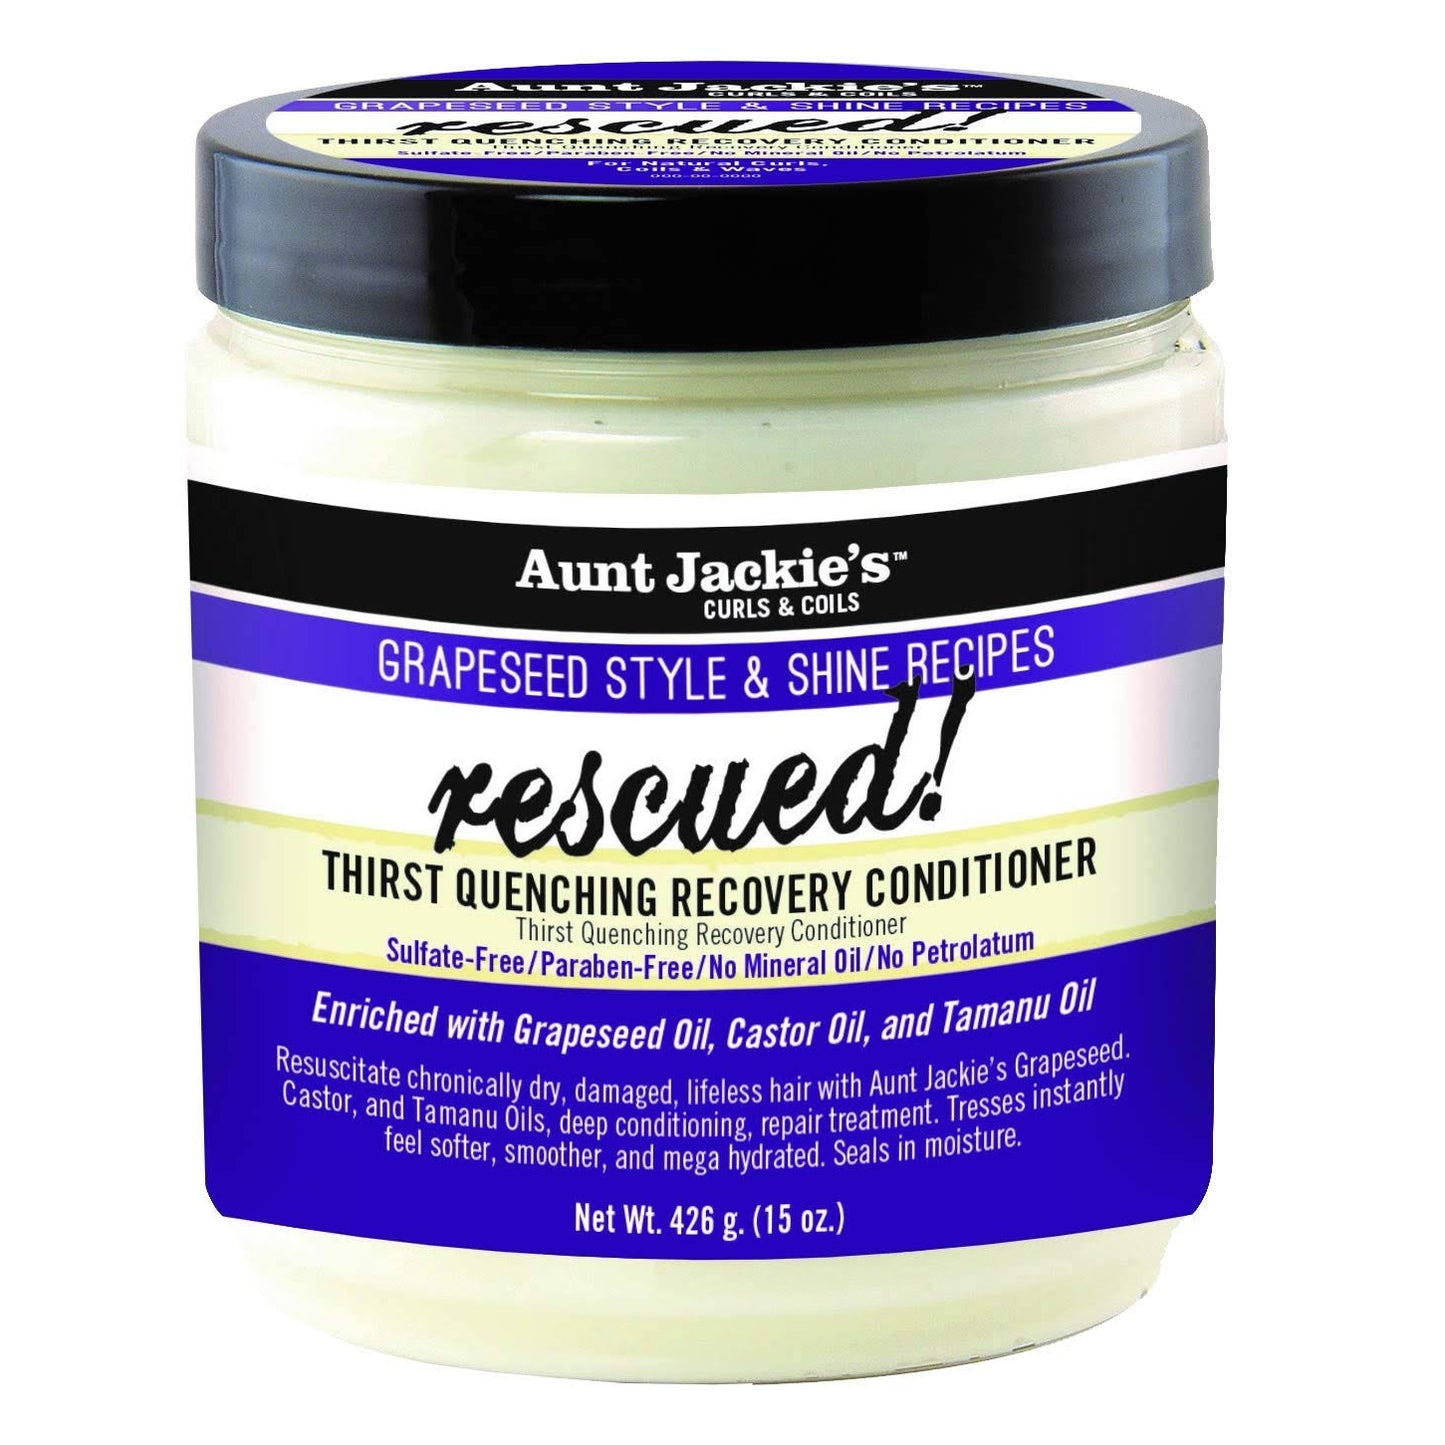 Aunt Jackie's Rescued